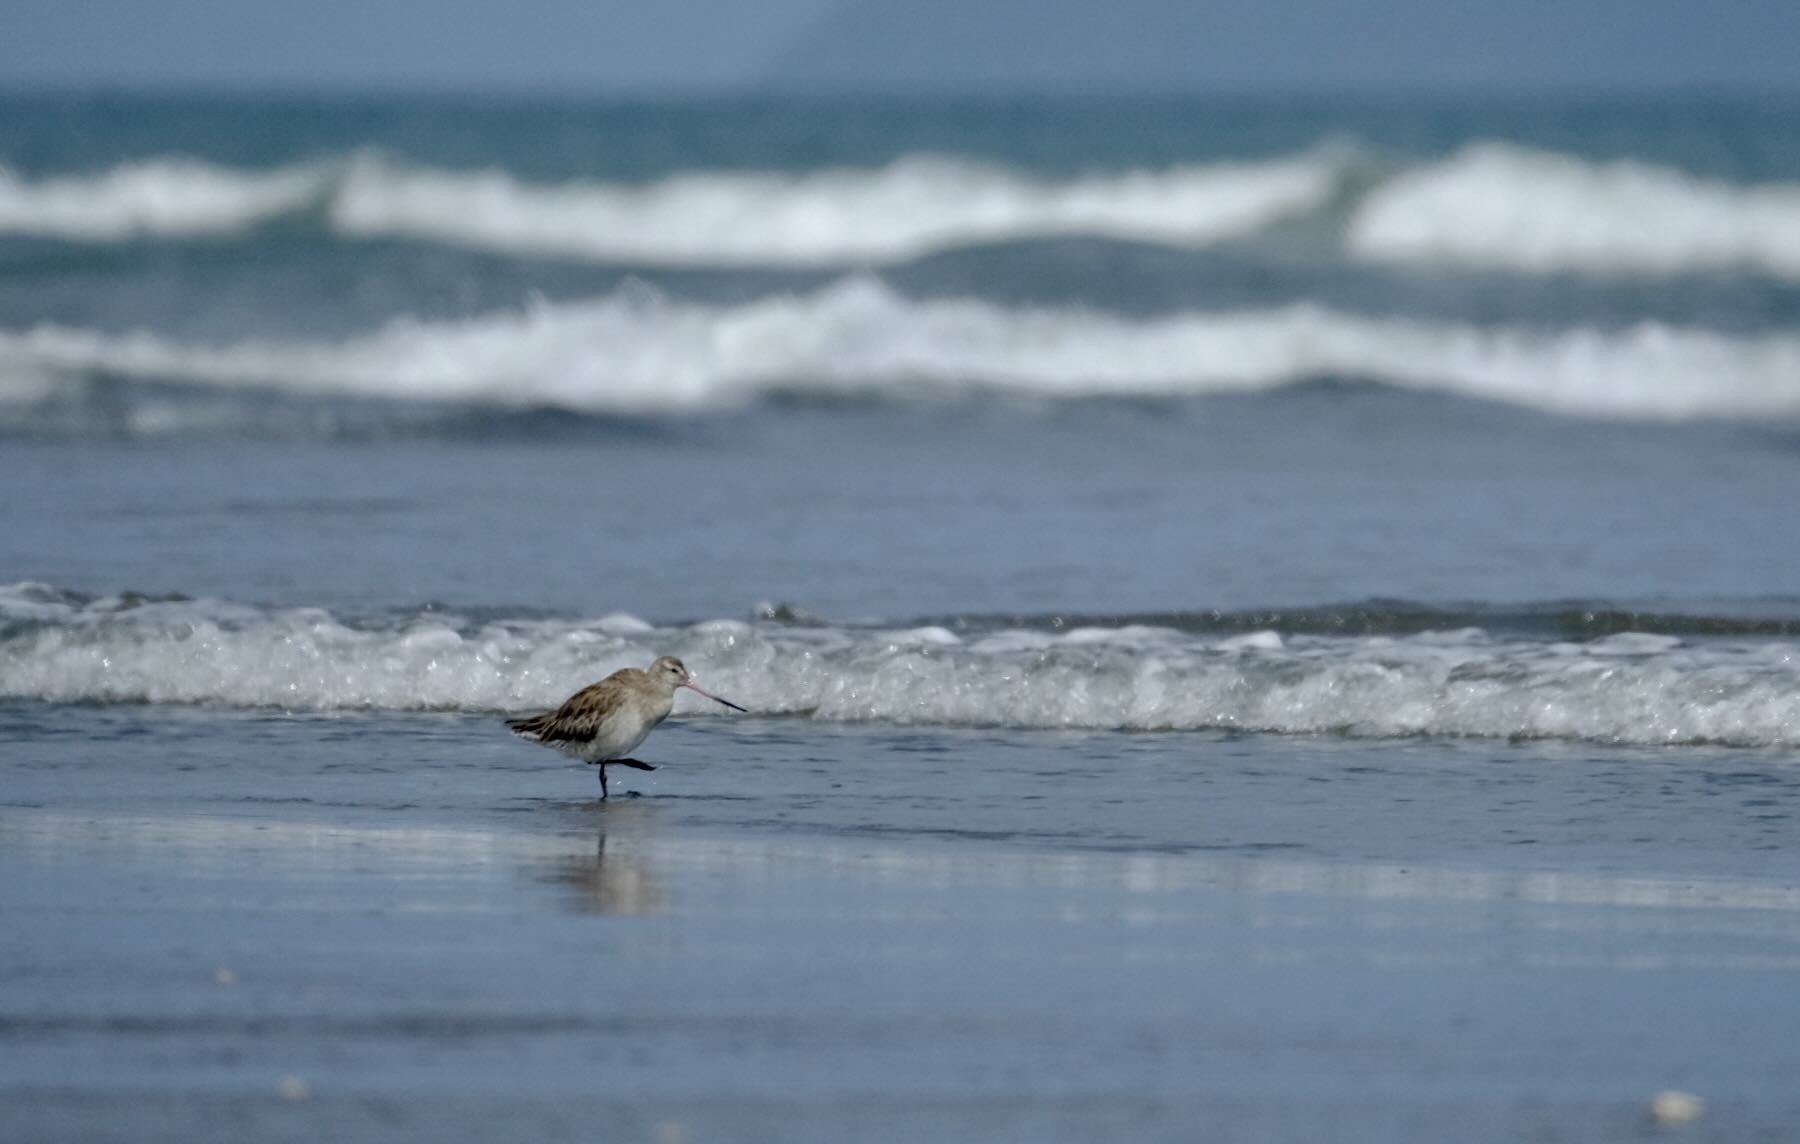 Medium sized long-billed bird walks on wet sand at the beach while a small wave breaks nearby. 